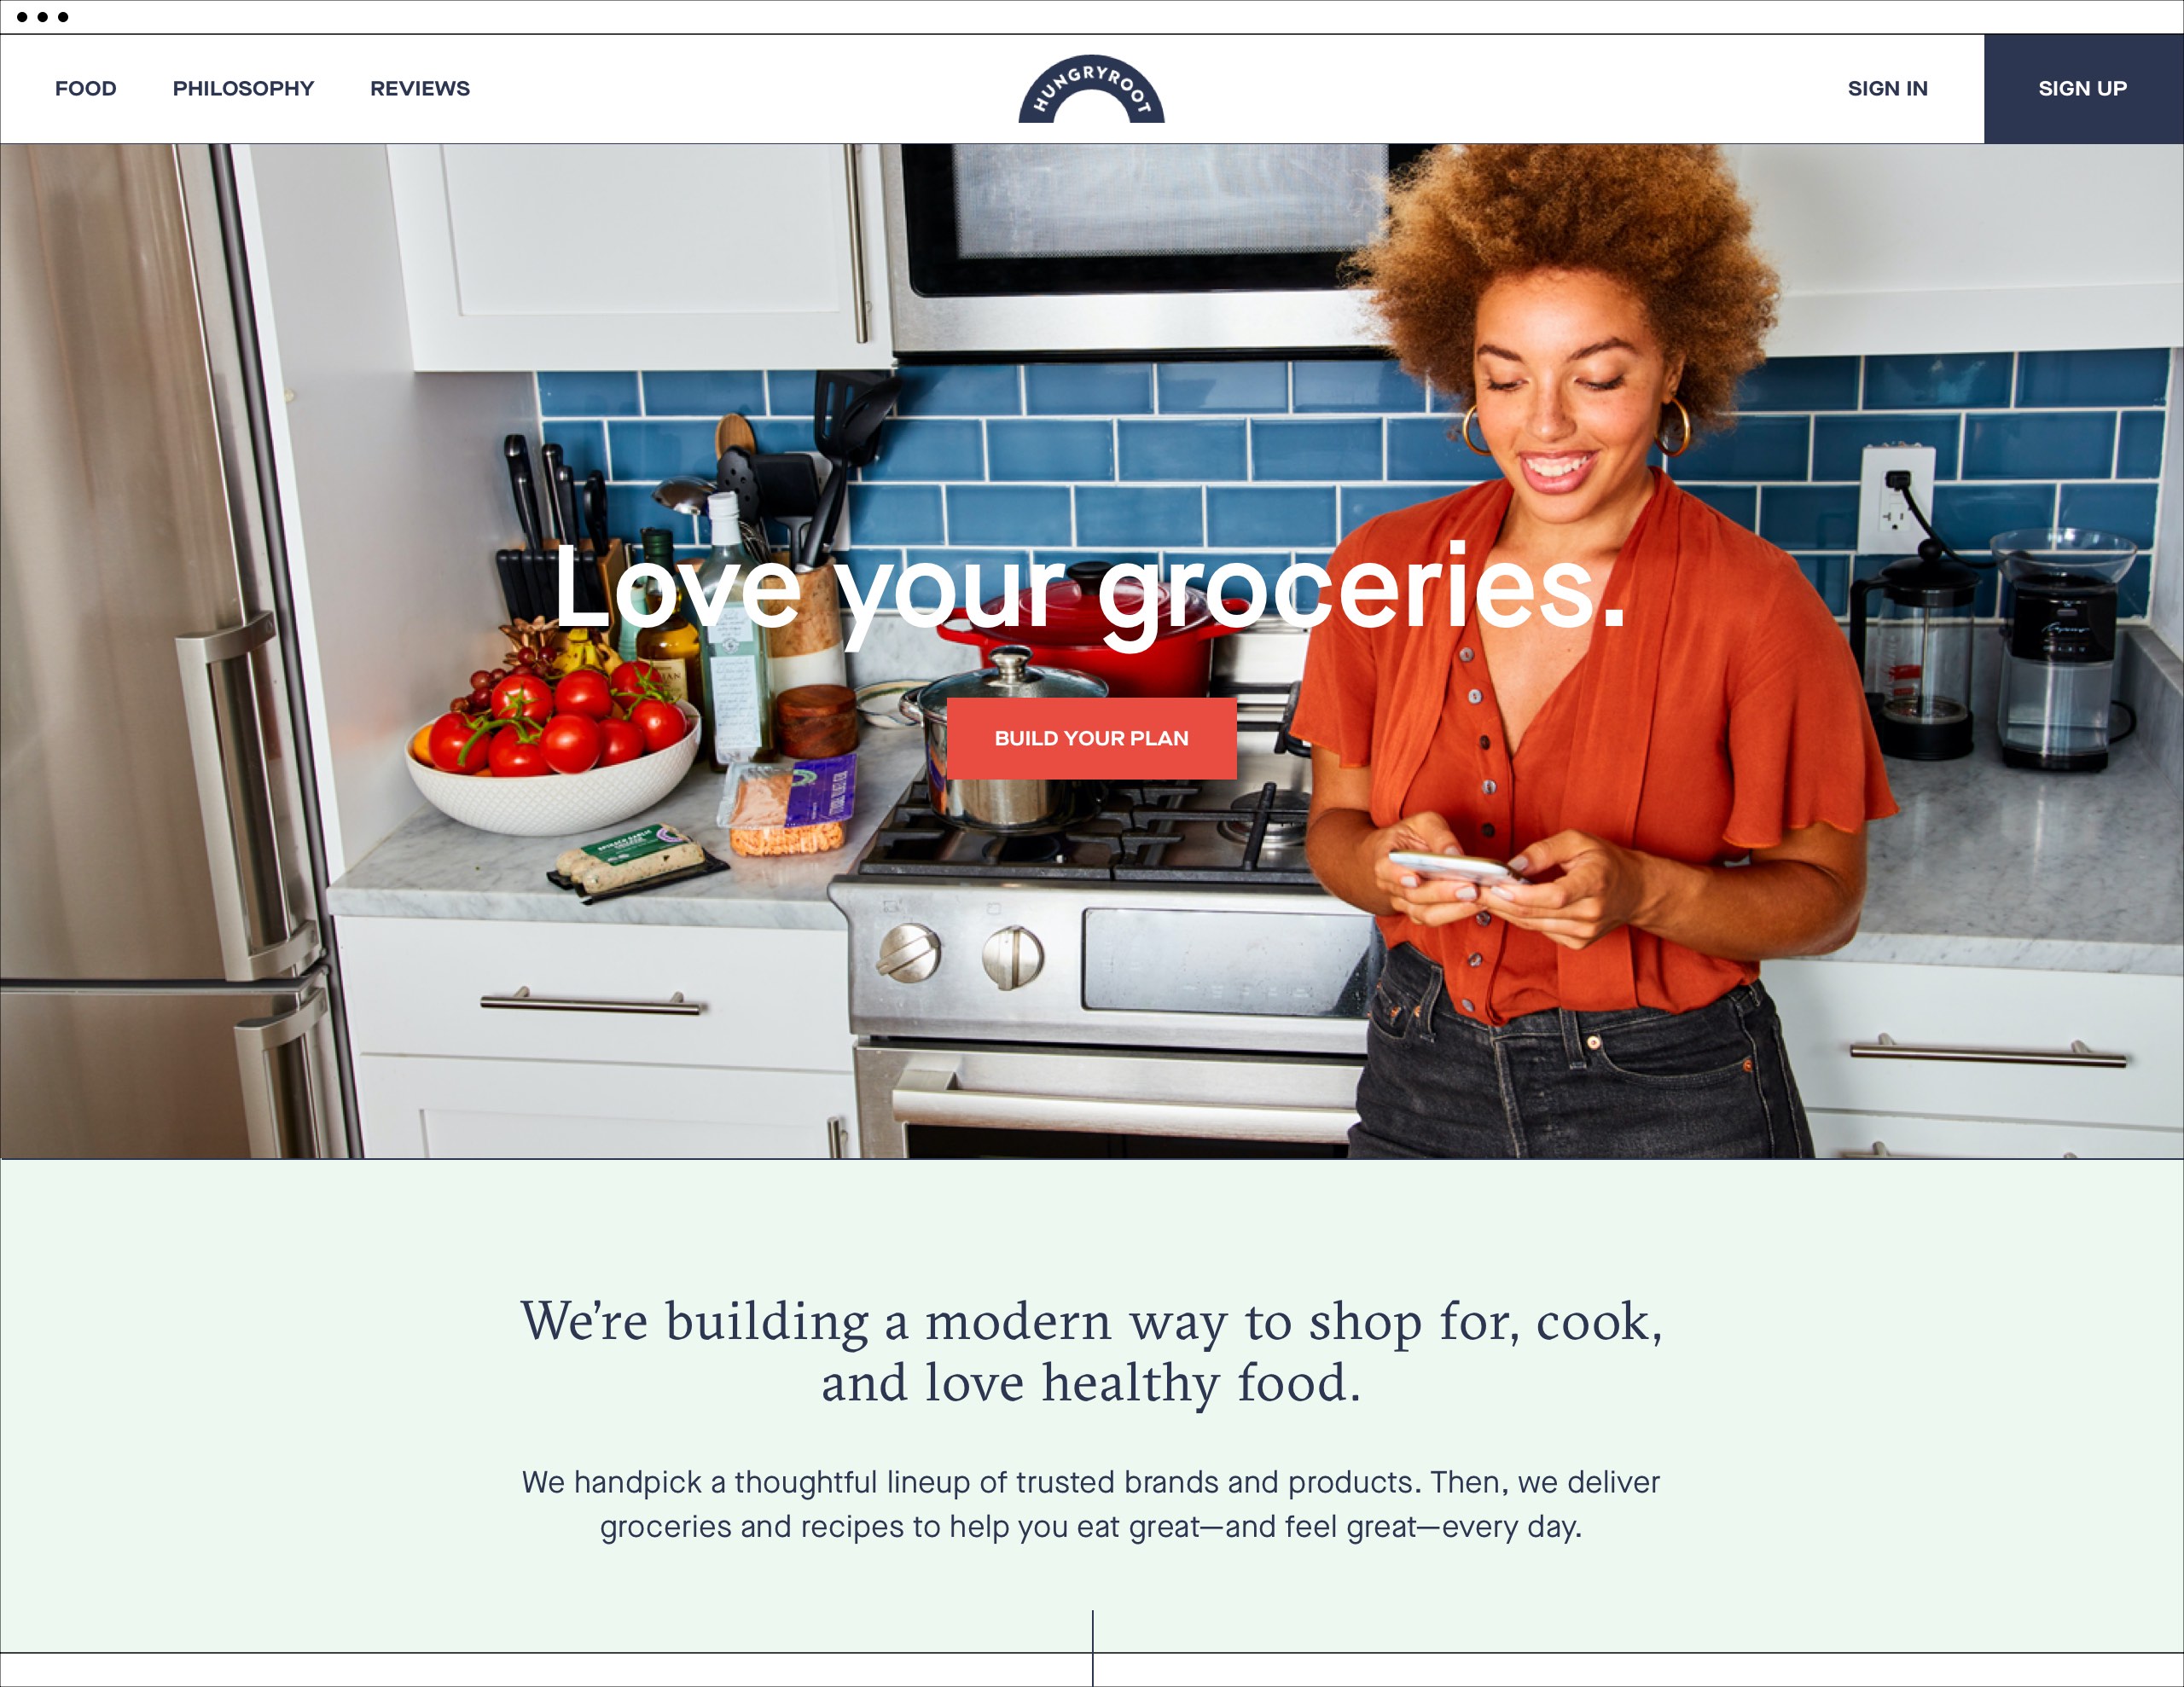 Woman in kitchen planning dinner using her mobile phone. Headline reads Love Your Groceries